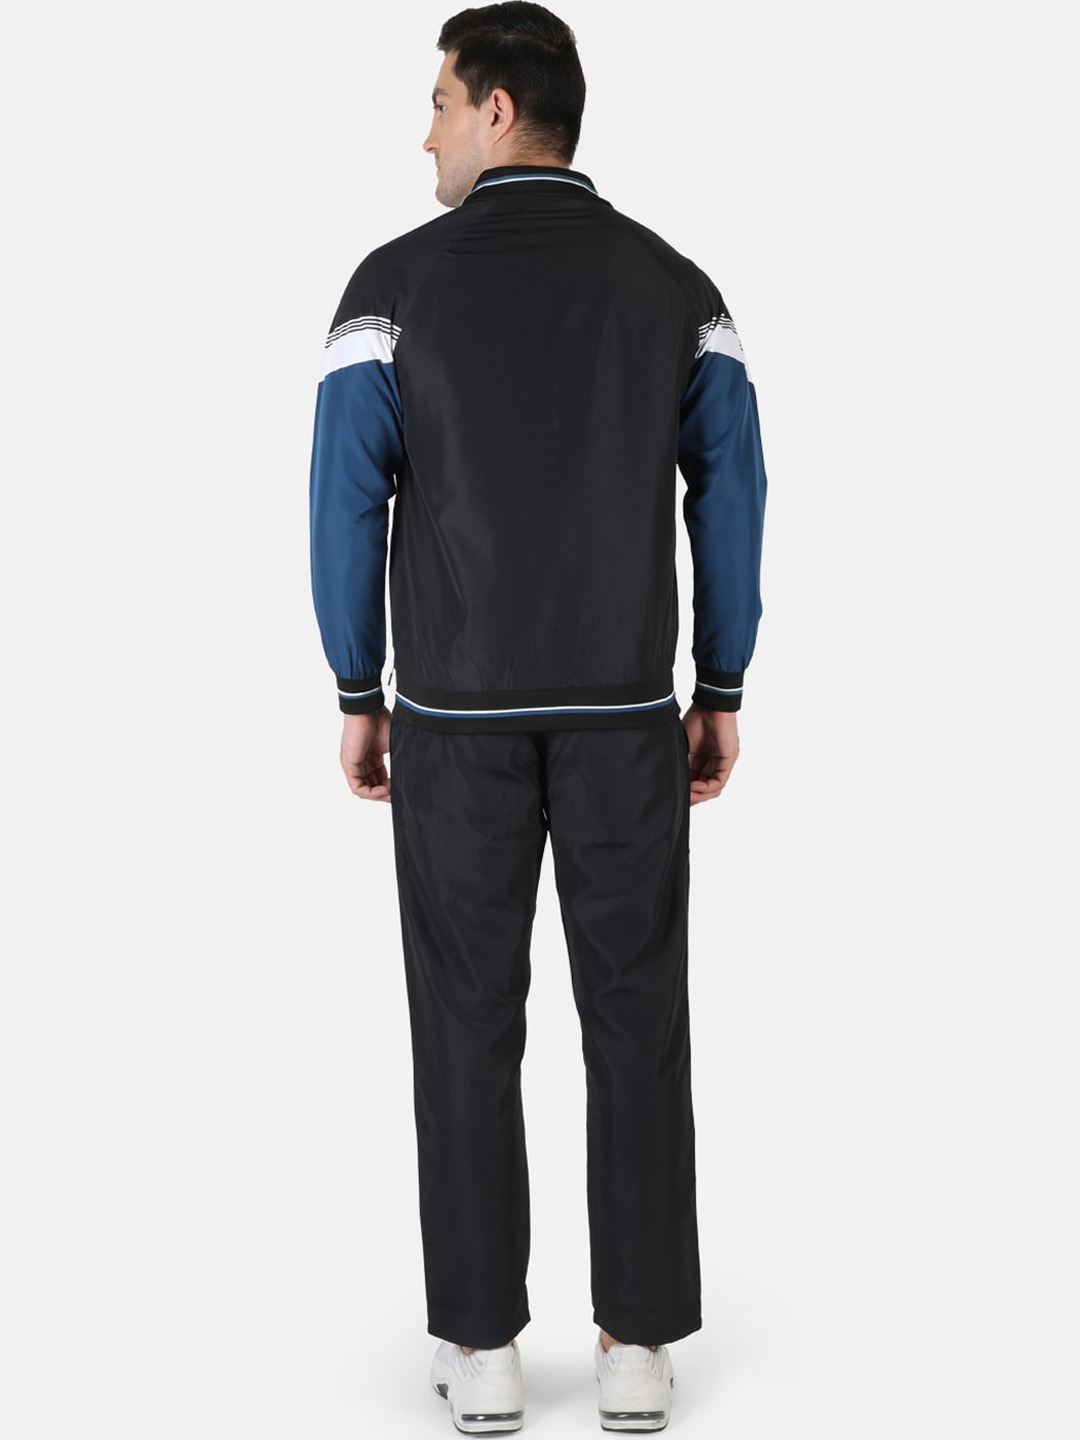 Clothing Tracksuits | Monte Carlo Men Black & Blue Colourblocked Tracksuits - RD41107